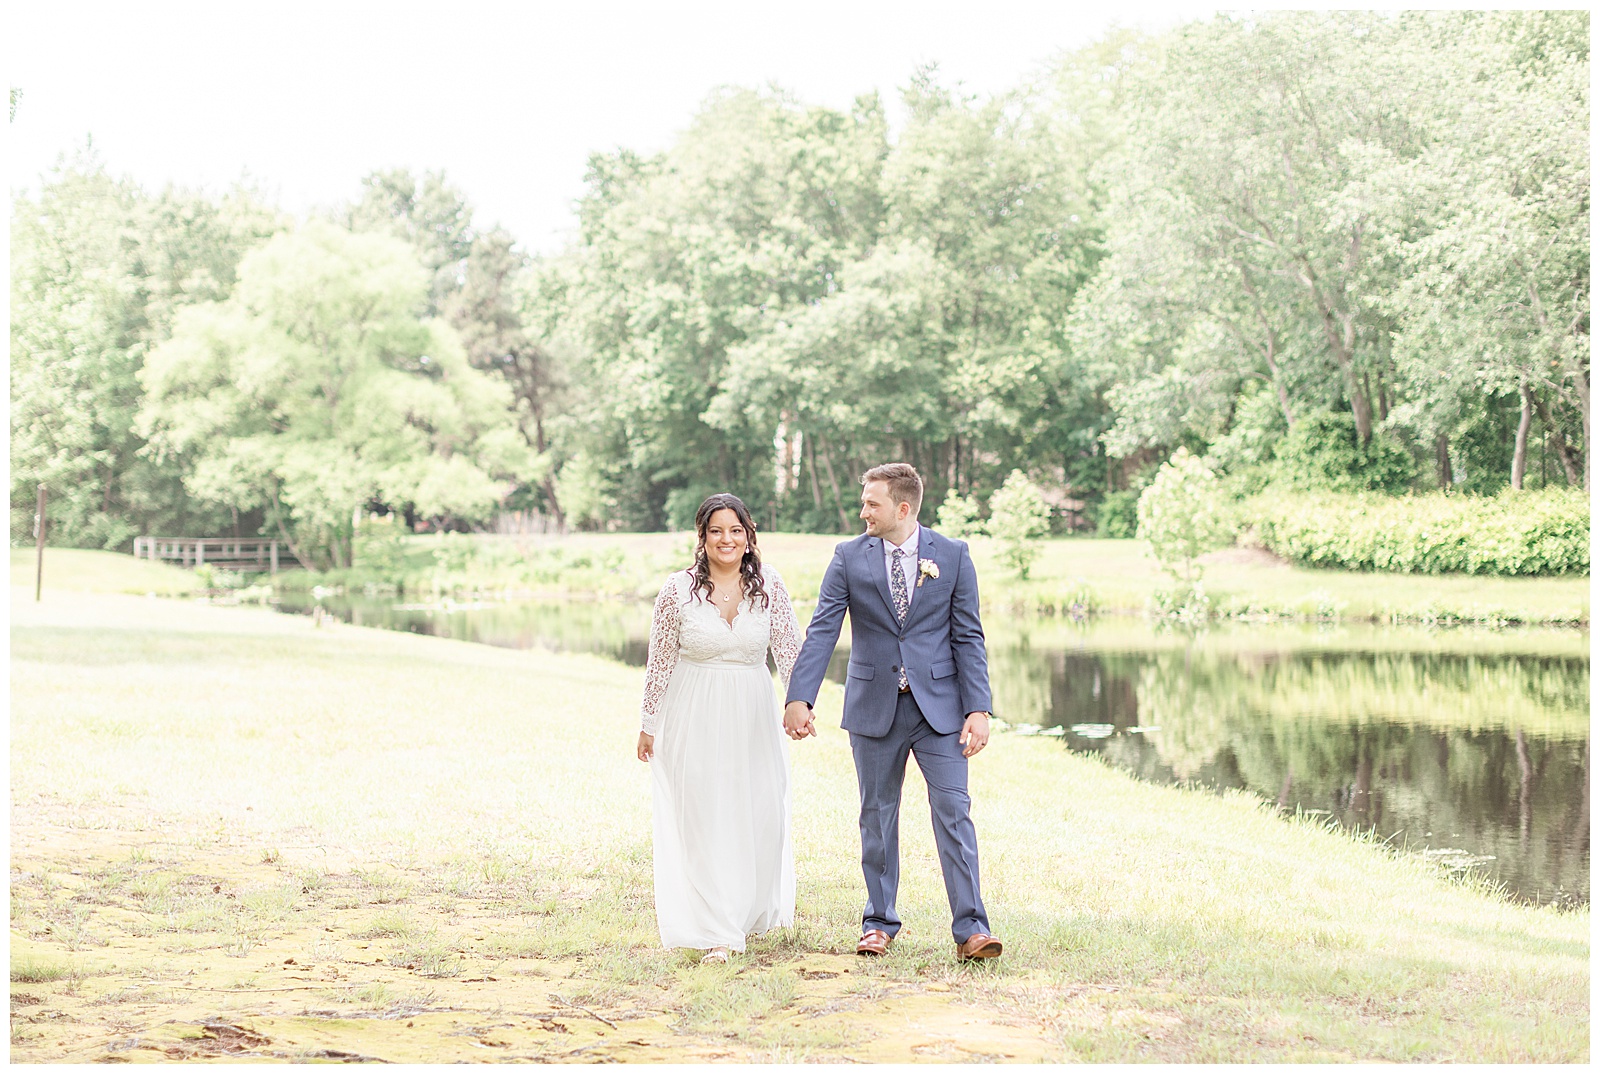 Bride and Groom take wedding photos in NJ park captured by NJ Wedding Photographer and Videographer Diana and Korey Photo and Film